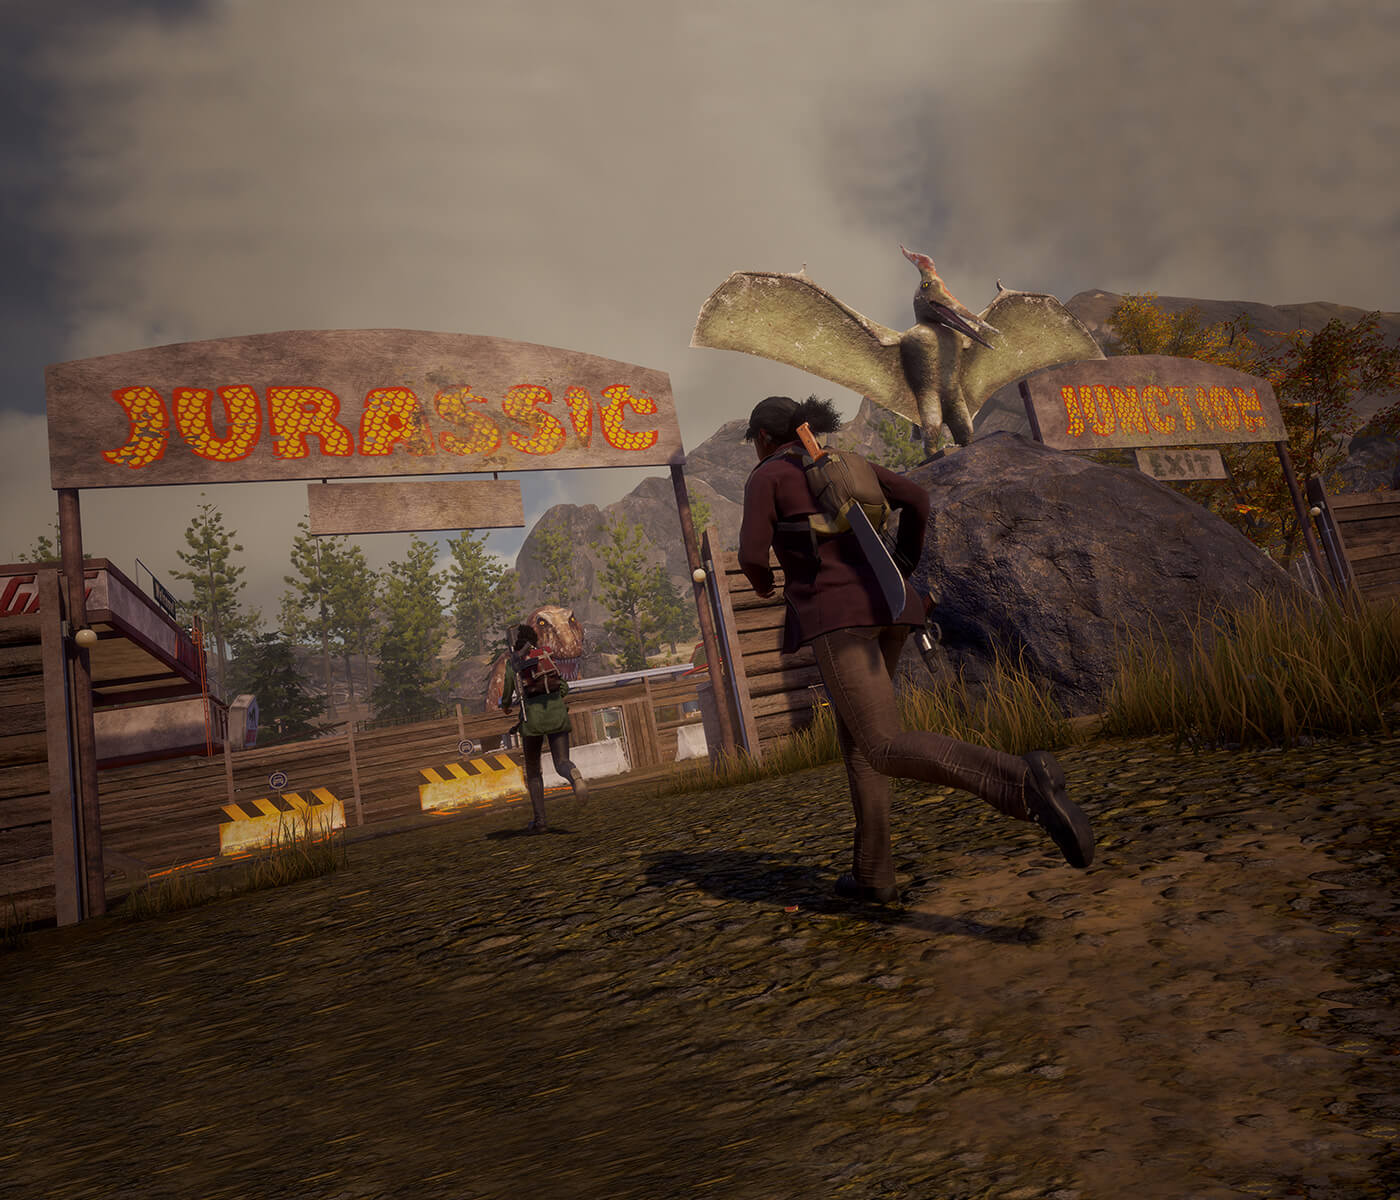 State of Decay boss explains lack of cooperative multiplayer